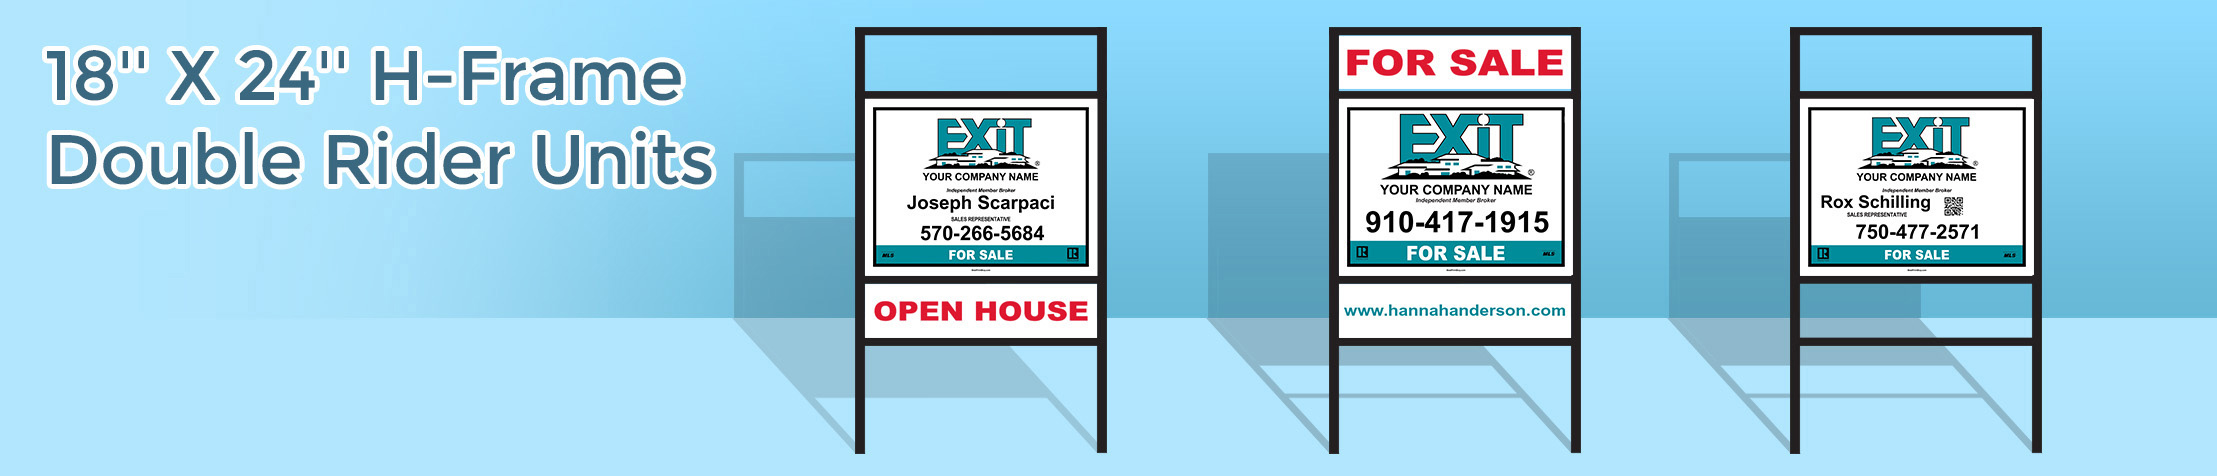 Exit Realty 18'' x 24'' H-Frame Double Rider Units - Exit Realty approved vendor real estate signs | BestPrintBuy.com